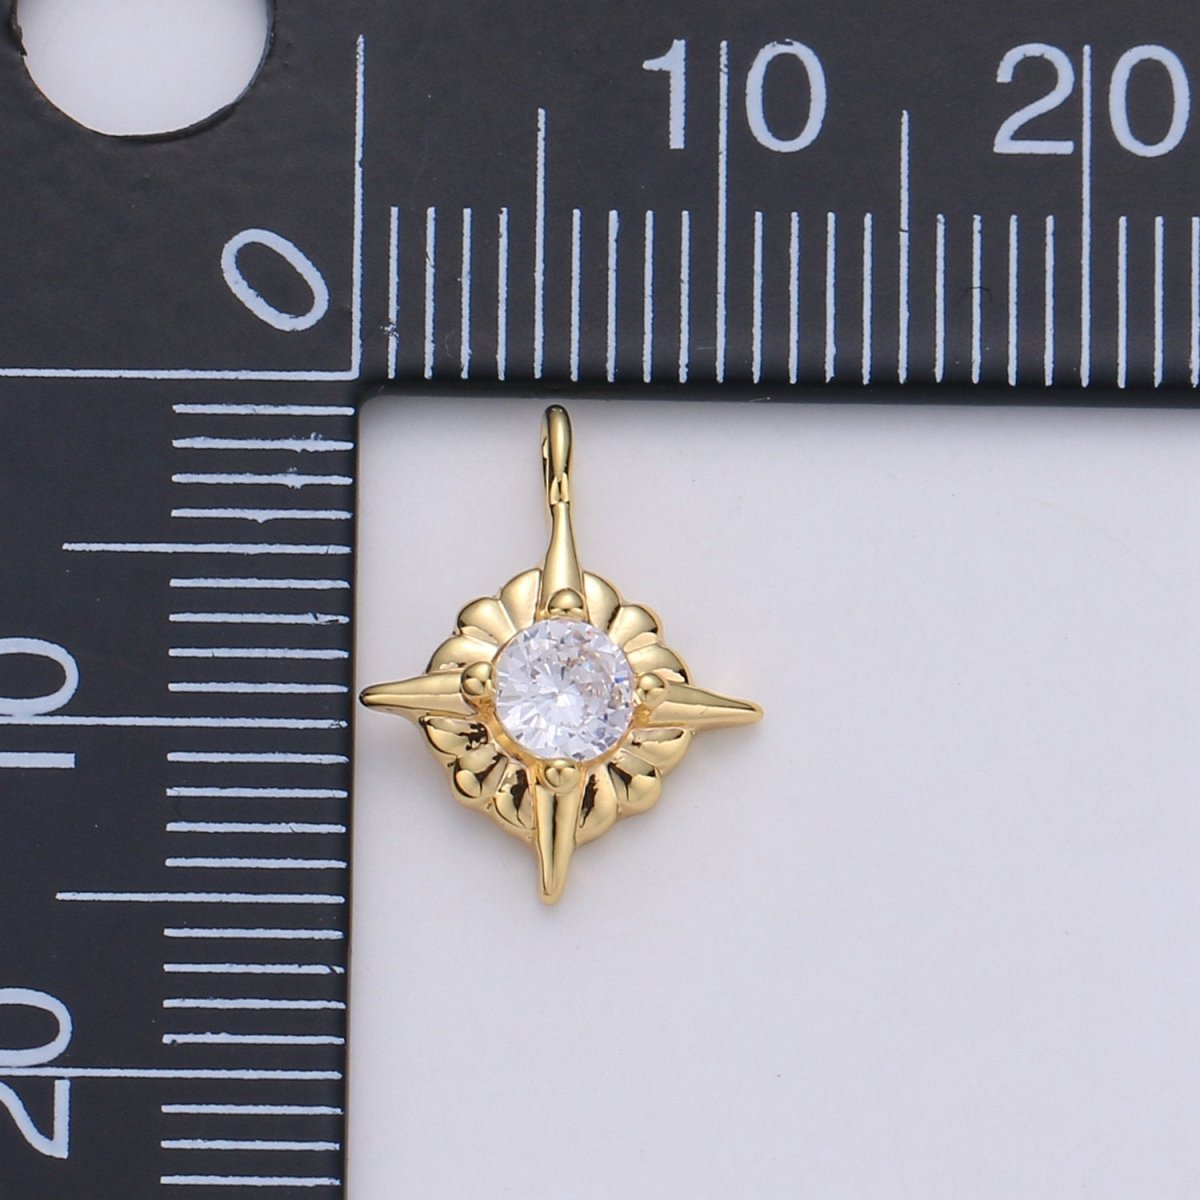 24K Gold Filled Dainty Tiny Sparkling Star Celestial Charm with Micro Pave Cubic Zirconia CZ Stone for Necklace or Bracelet C-890 - DLUXCA